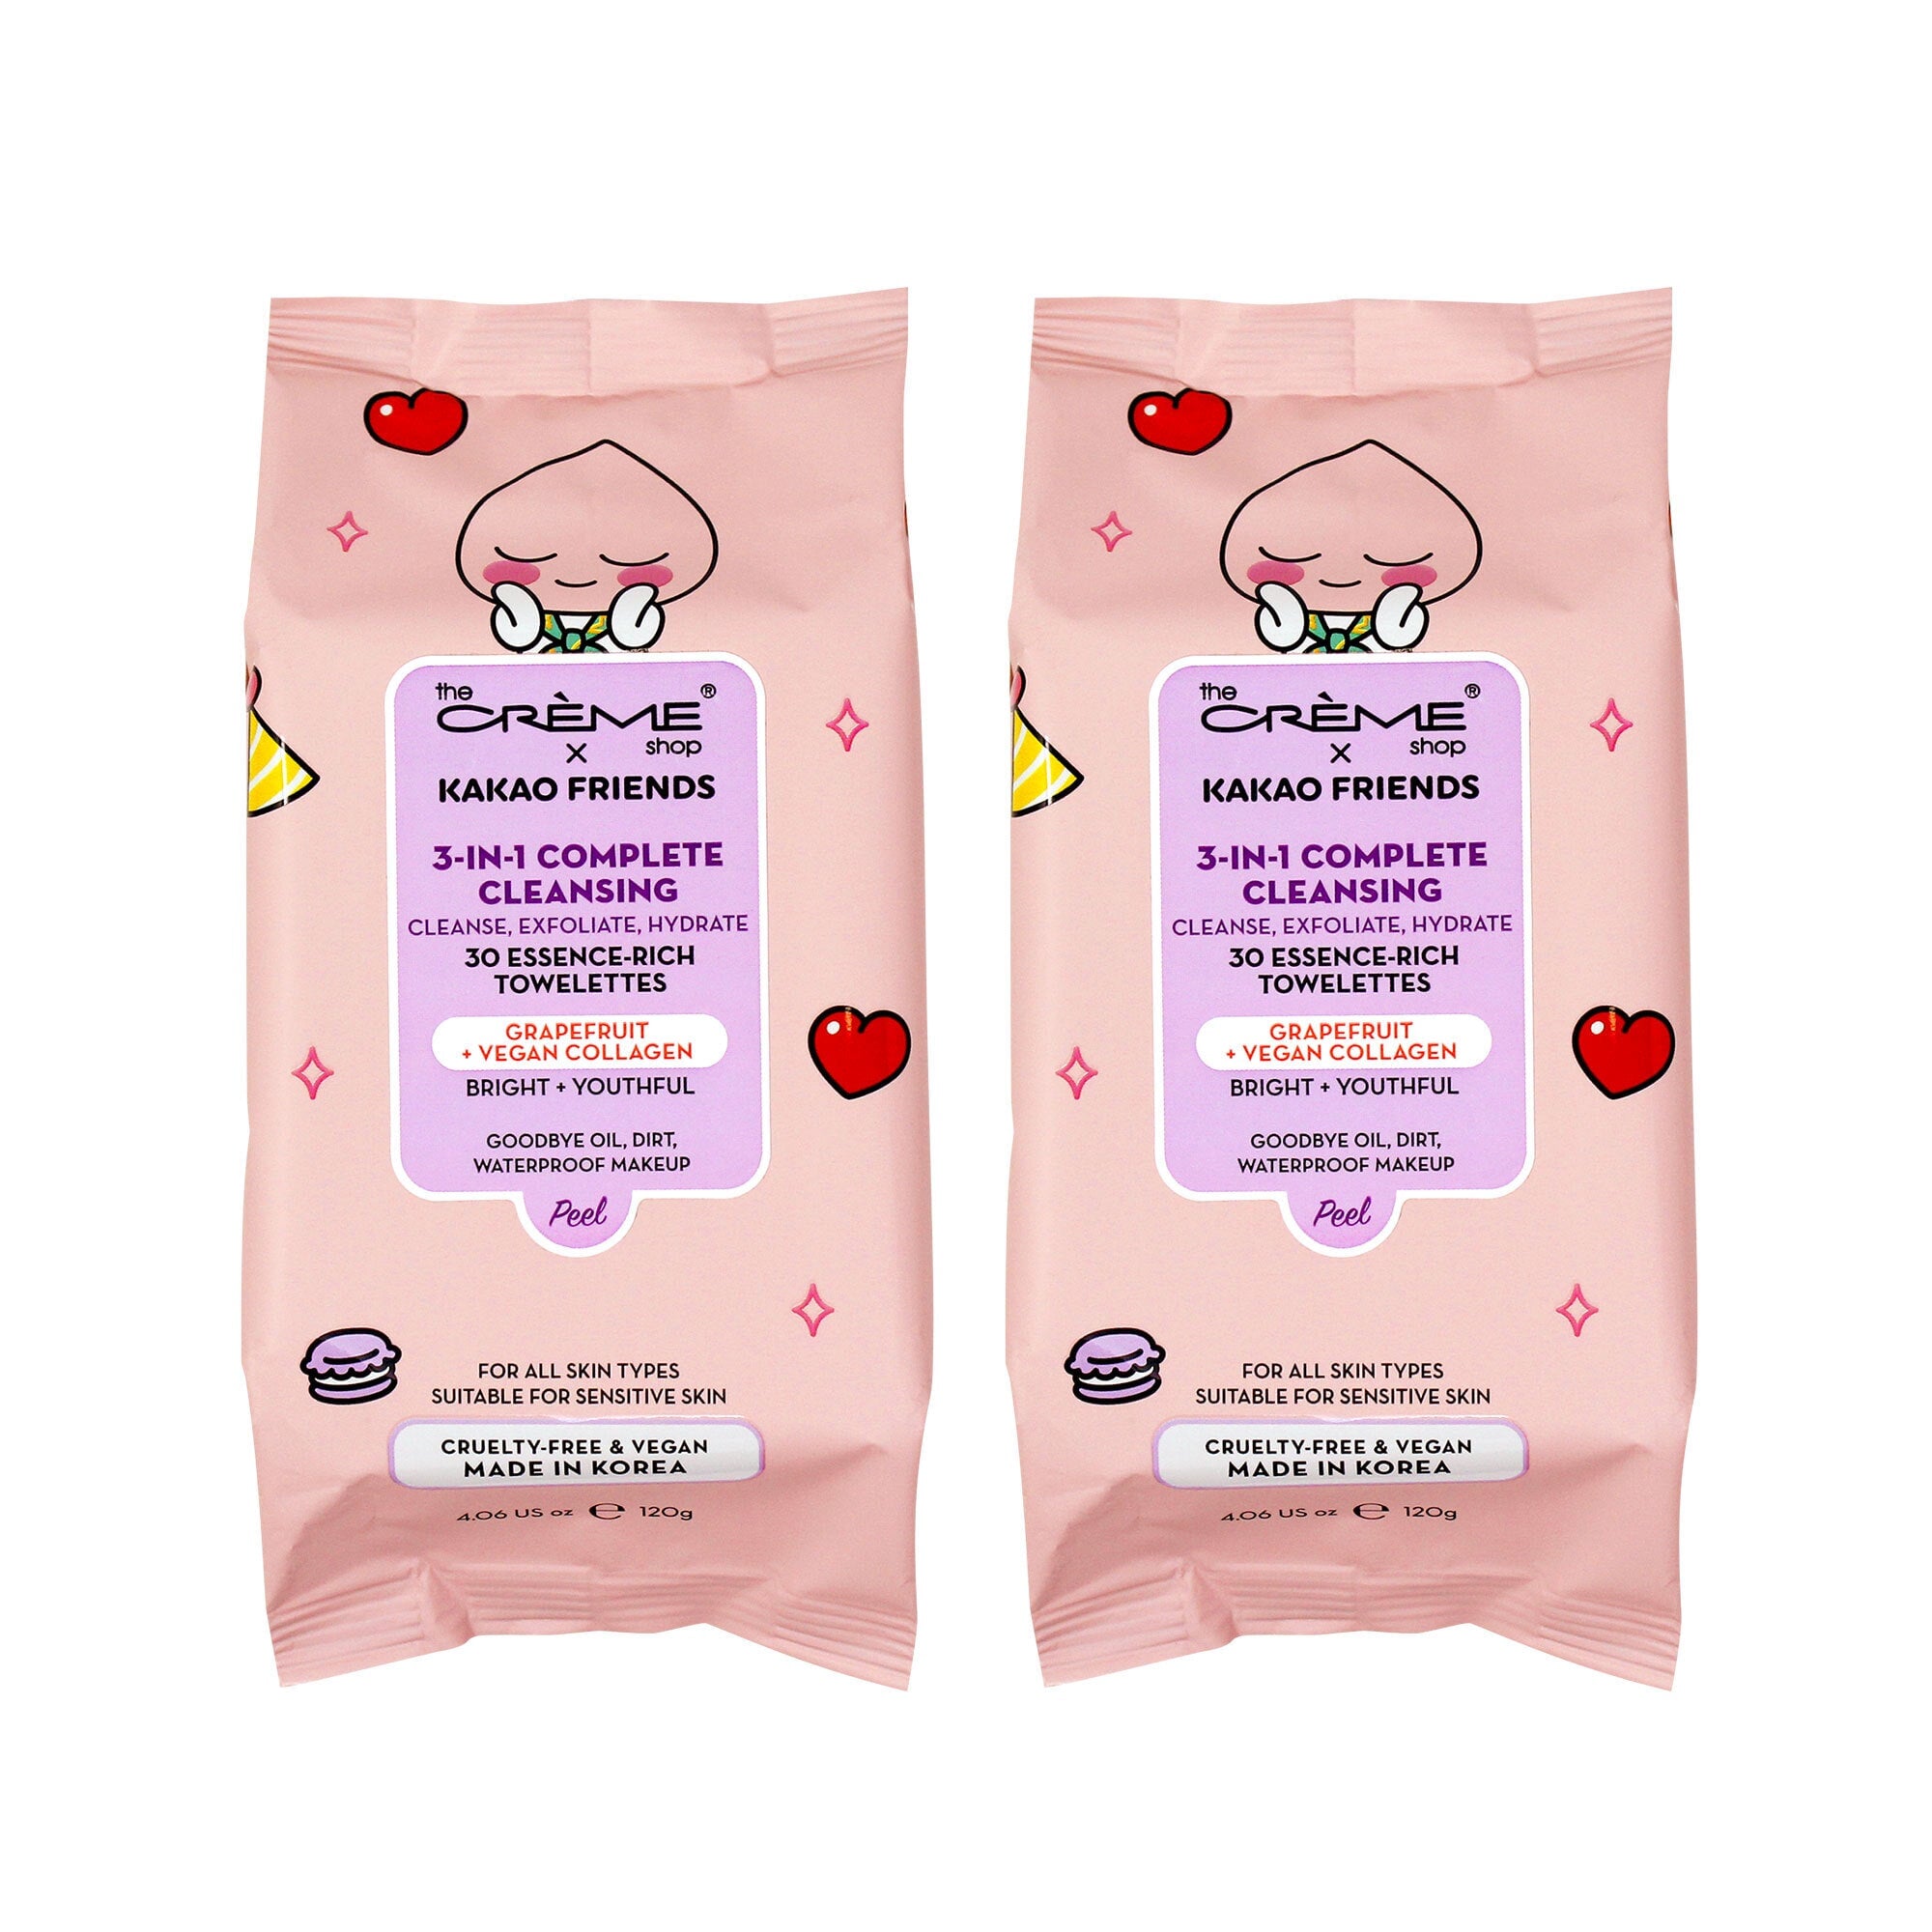 APEACH 3-In-1 Complete Cleansing Towelettes (2 Pack) The Crème Shop 